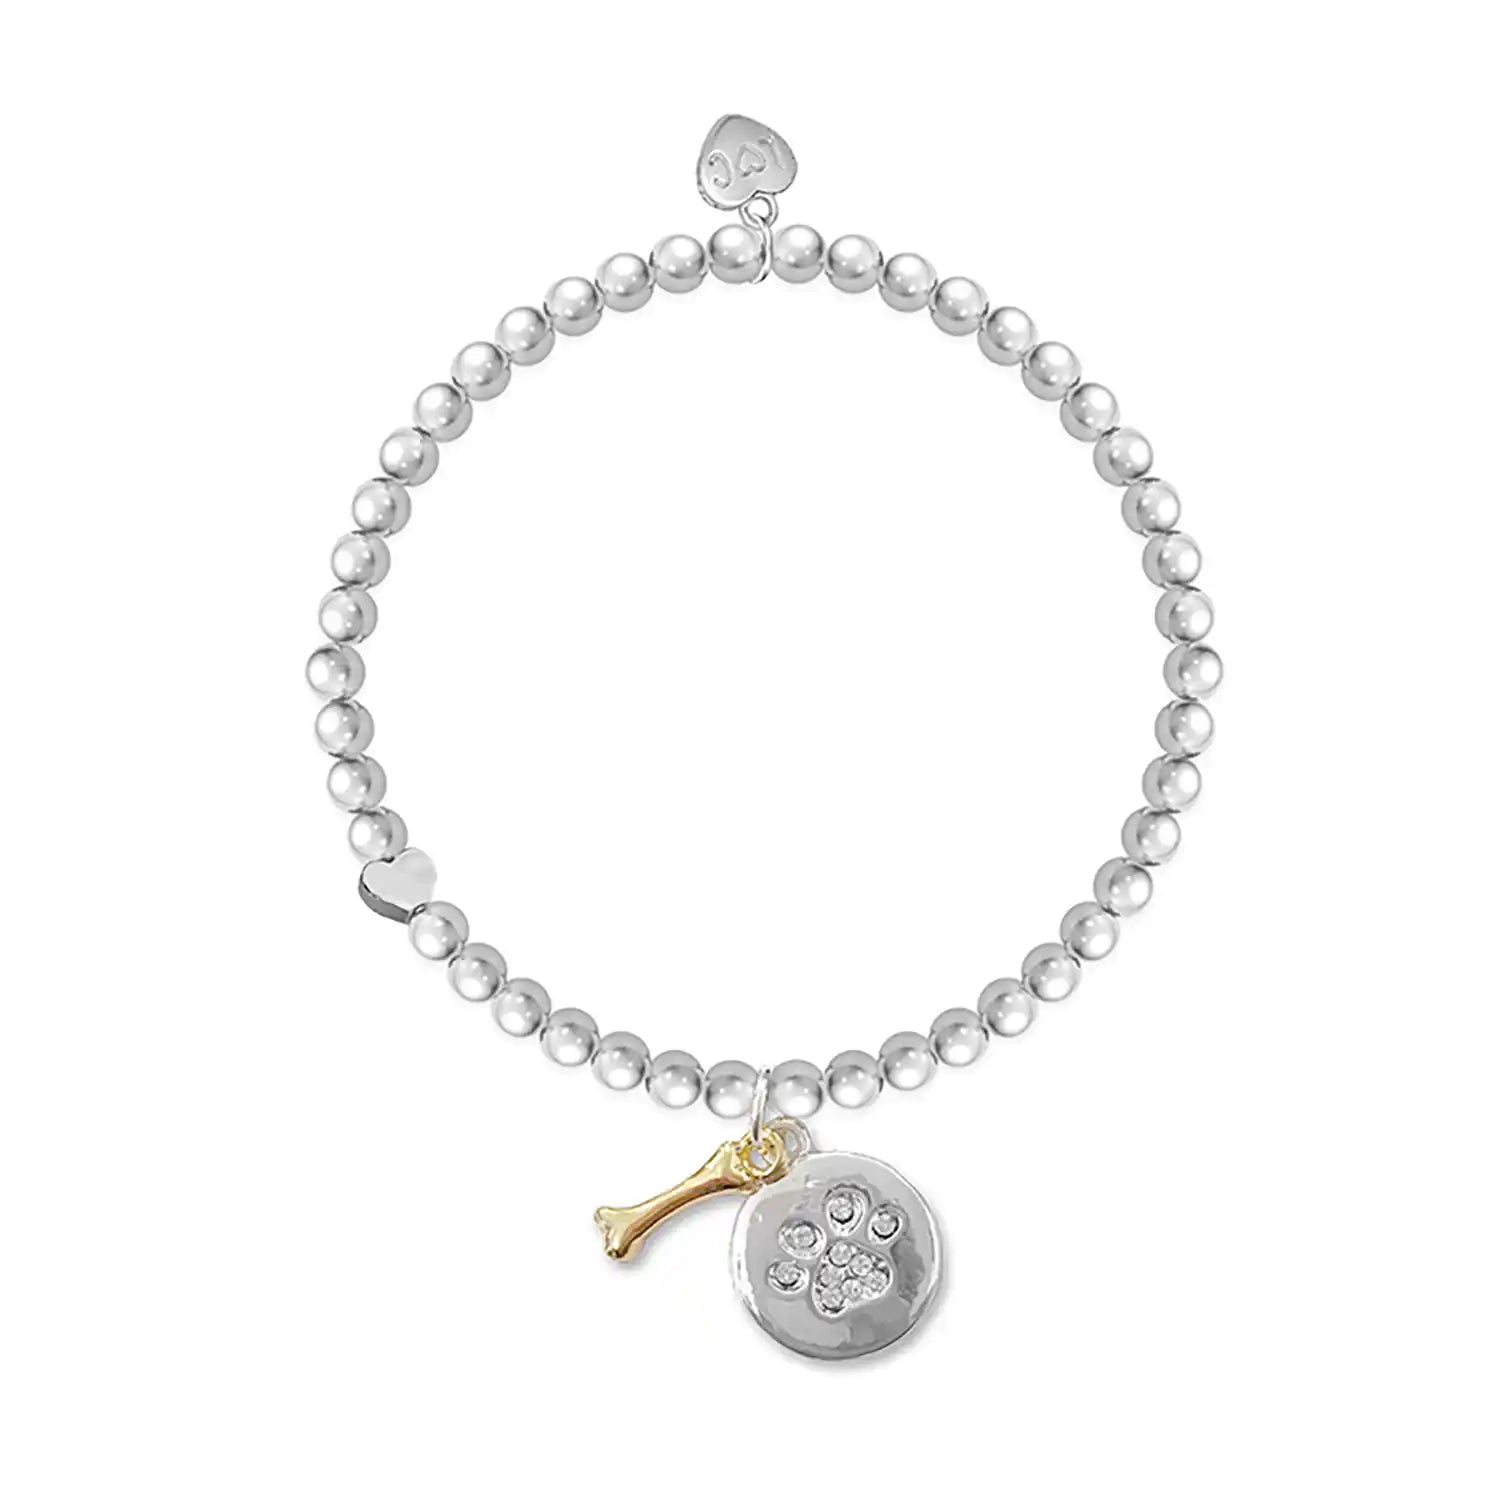 Life Charms Dog Lover Bracelet - Silver 1 Shaws Department Stores